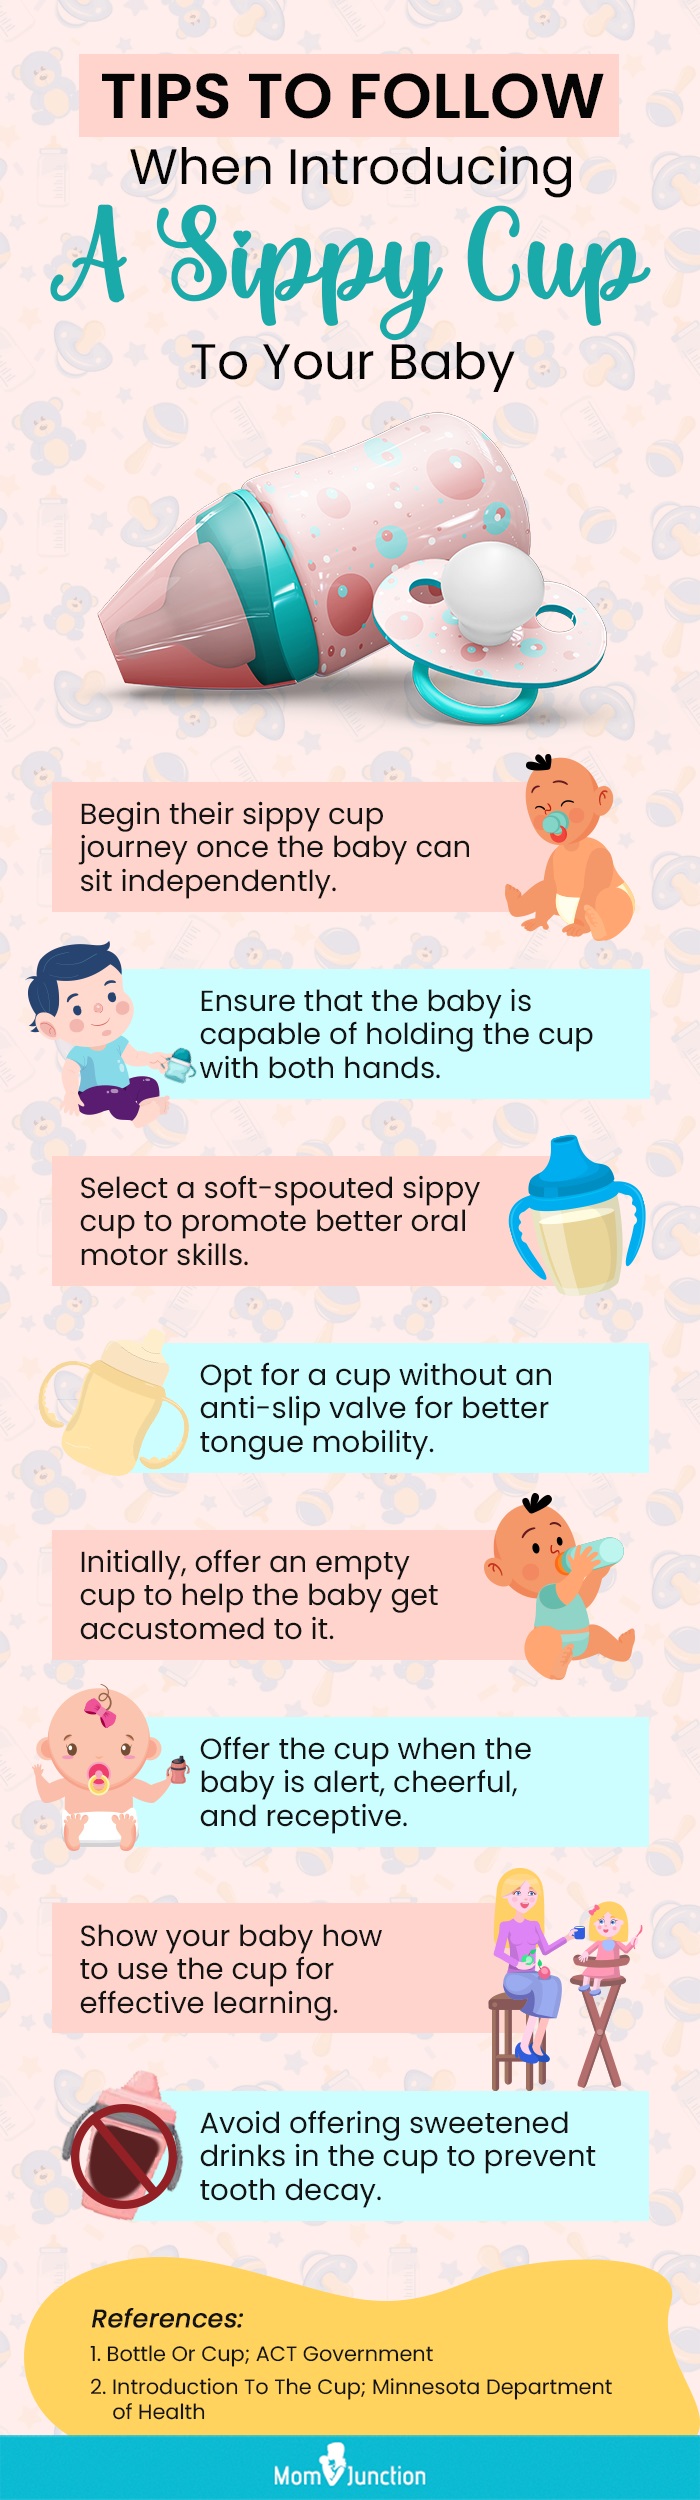 Tips To Follow When Introducing A Sippy Cup To Your Baby (infographic)